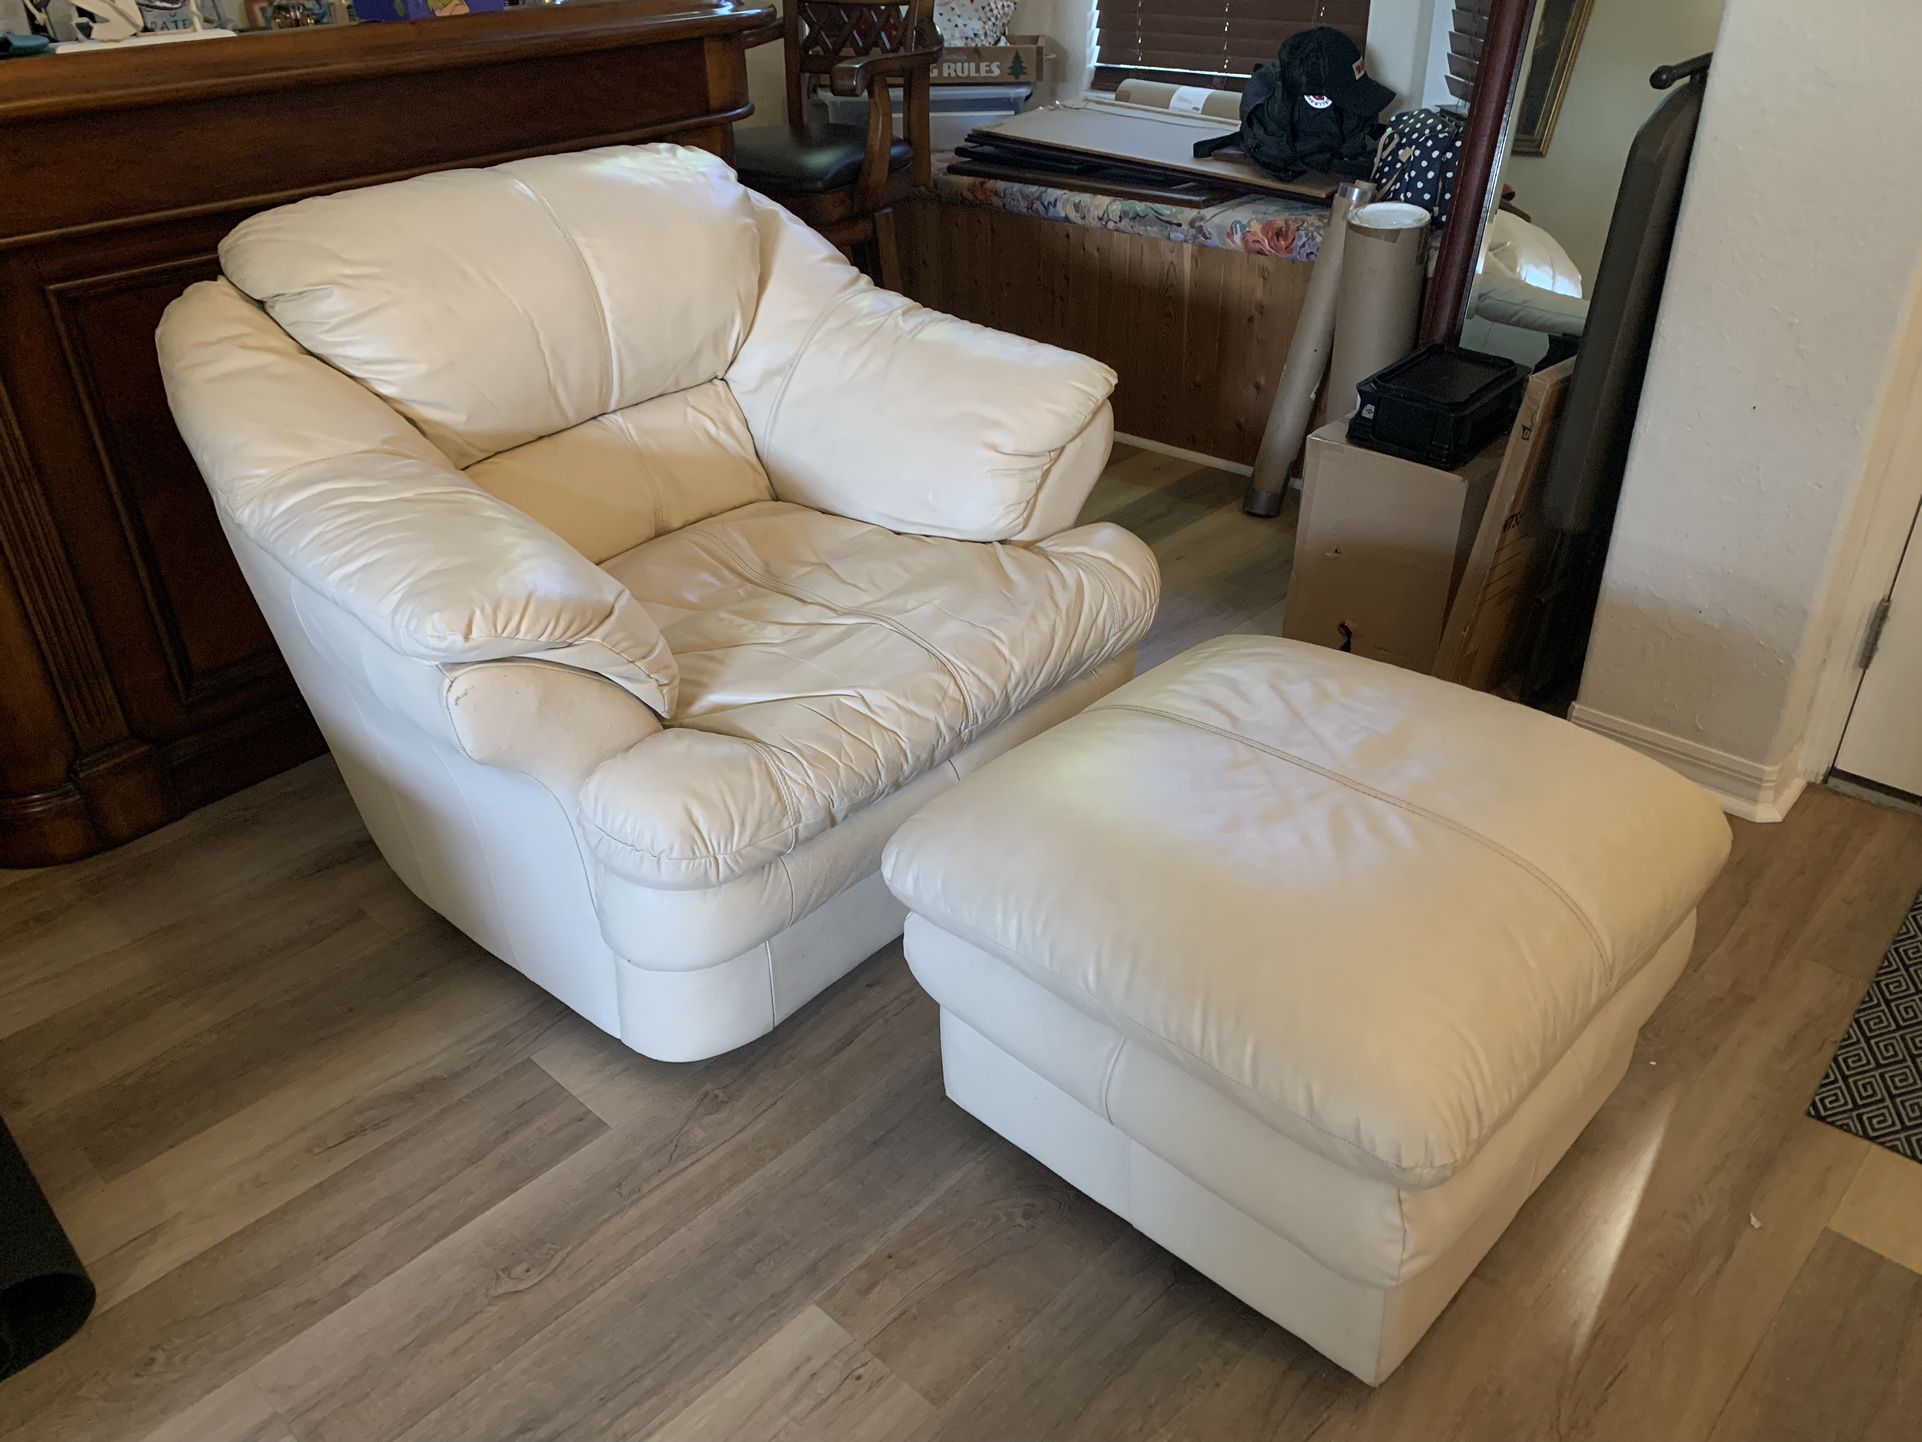 Italian Leather oversized chair and ottoman, off-white